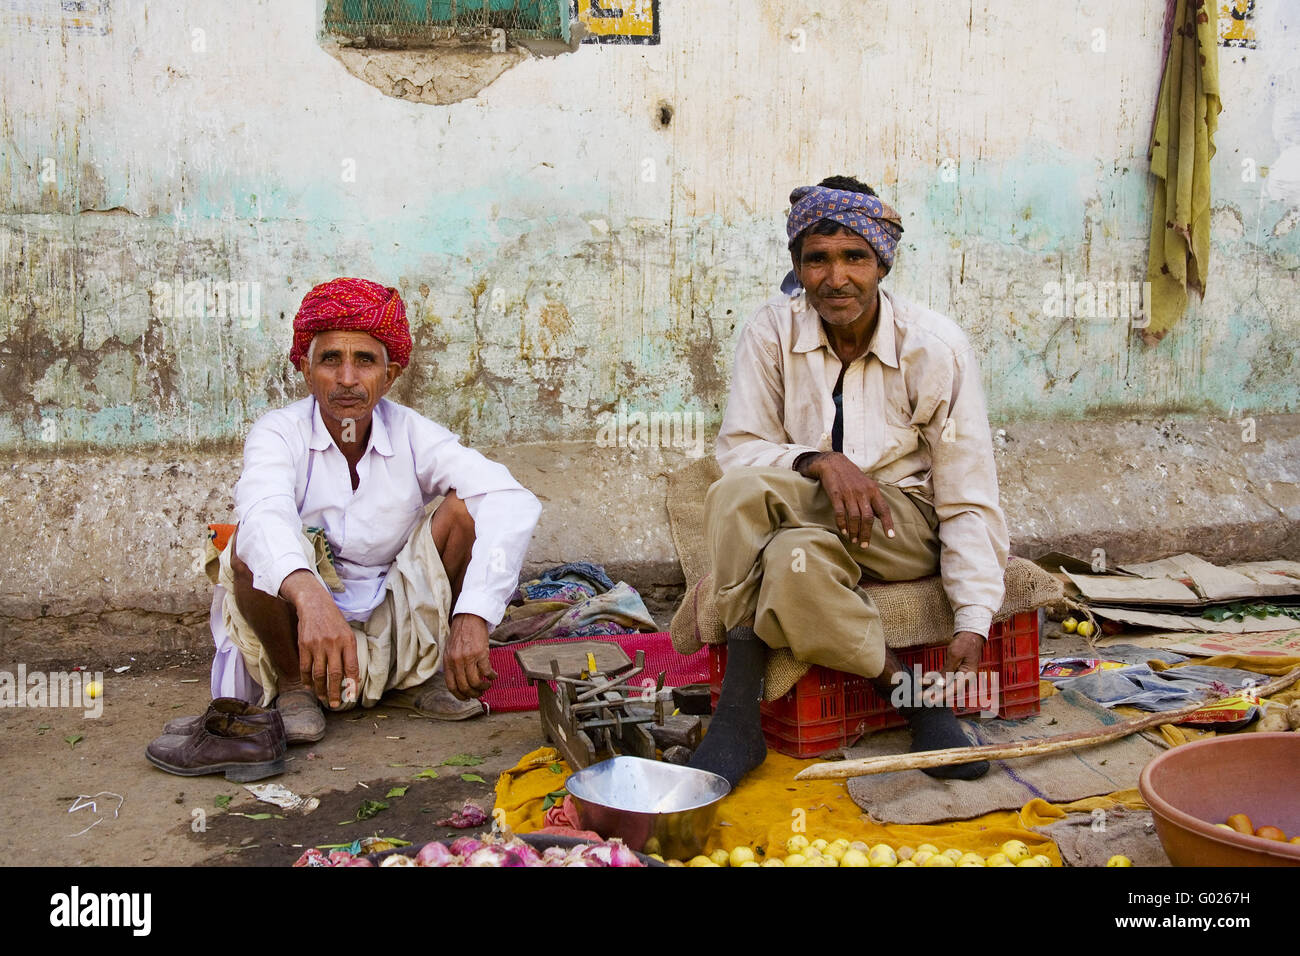 indian on a vegetable market, North India, India, Asia Stock Photo